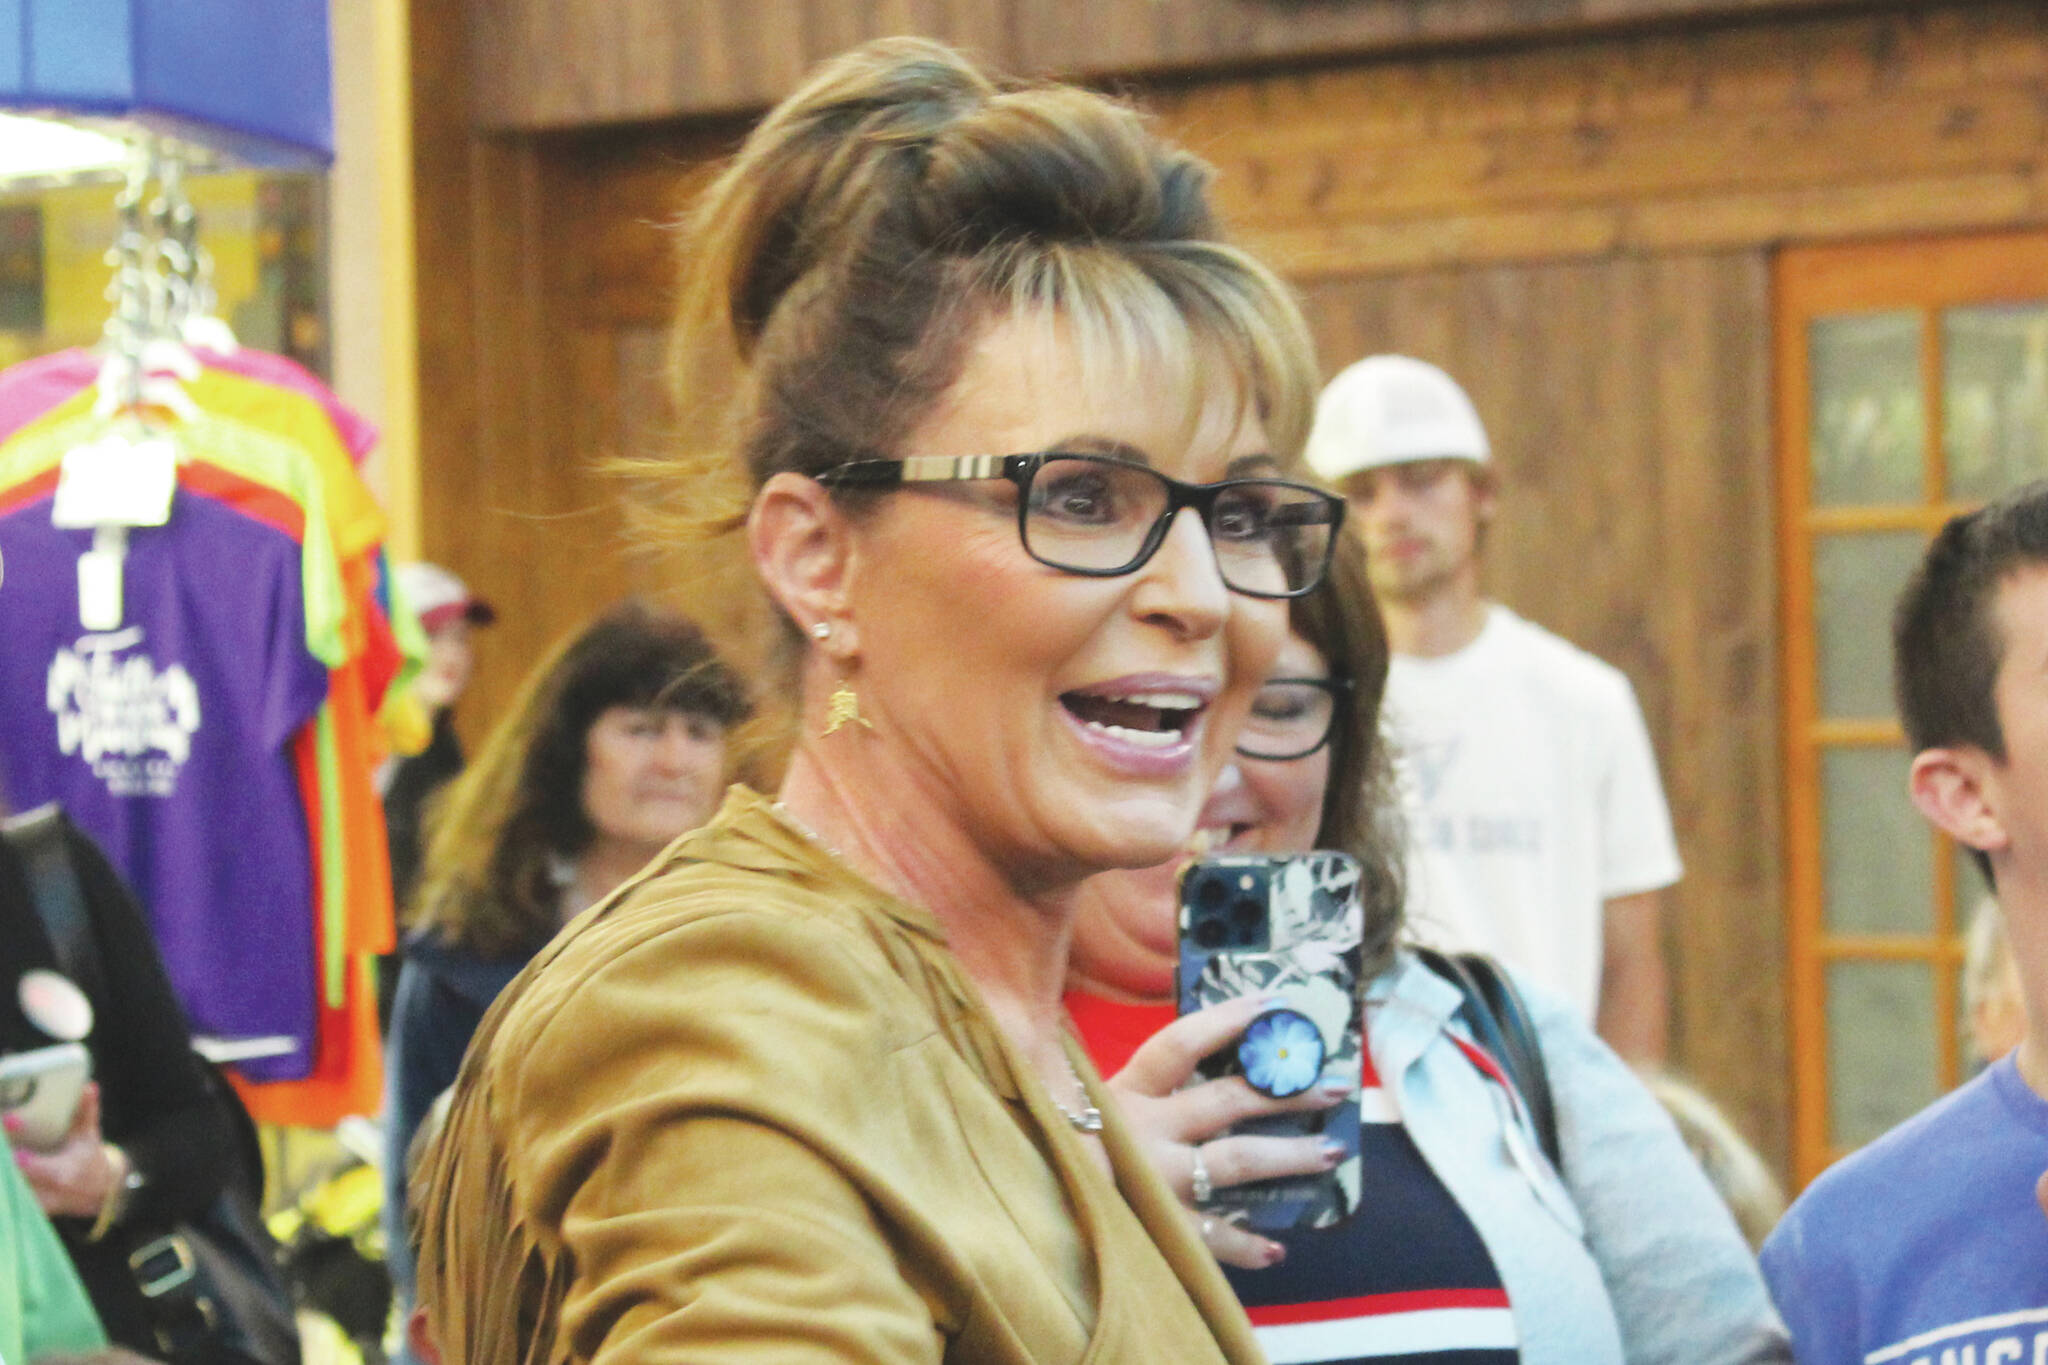 Former Alaska Gov. Sarah Palin speaks with attendees at a meet and greet event outside of Ginger’s Restaurant on Saturday, May 14, 2022 in Soldotna, Alaska. (Ashlyn O’Hara/Peninsula Clarion)